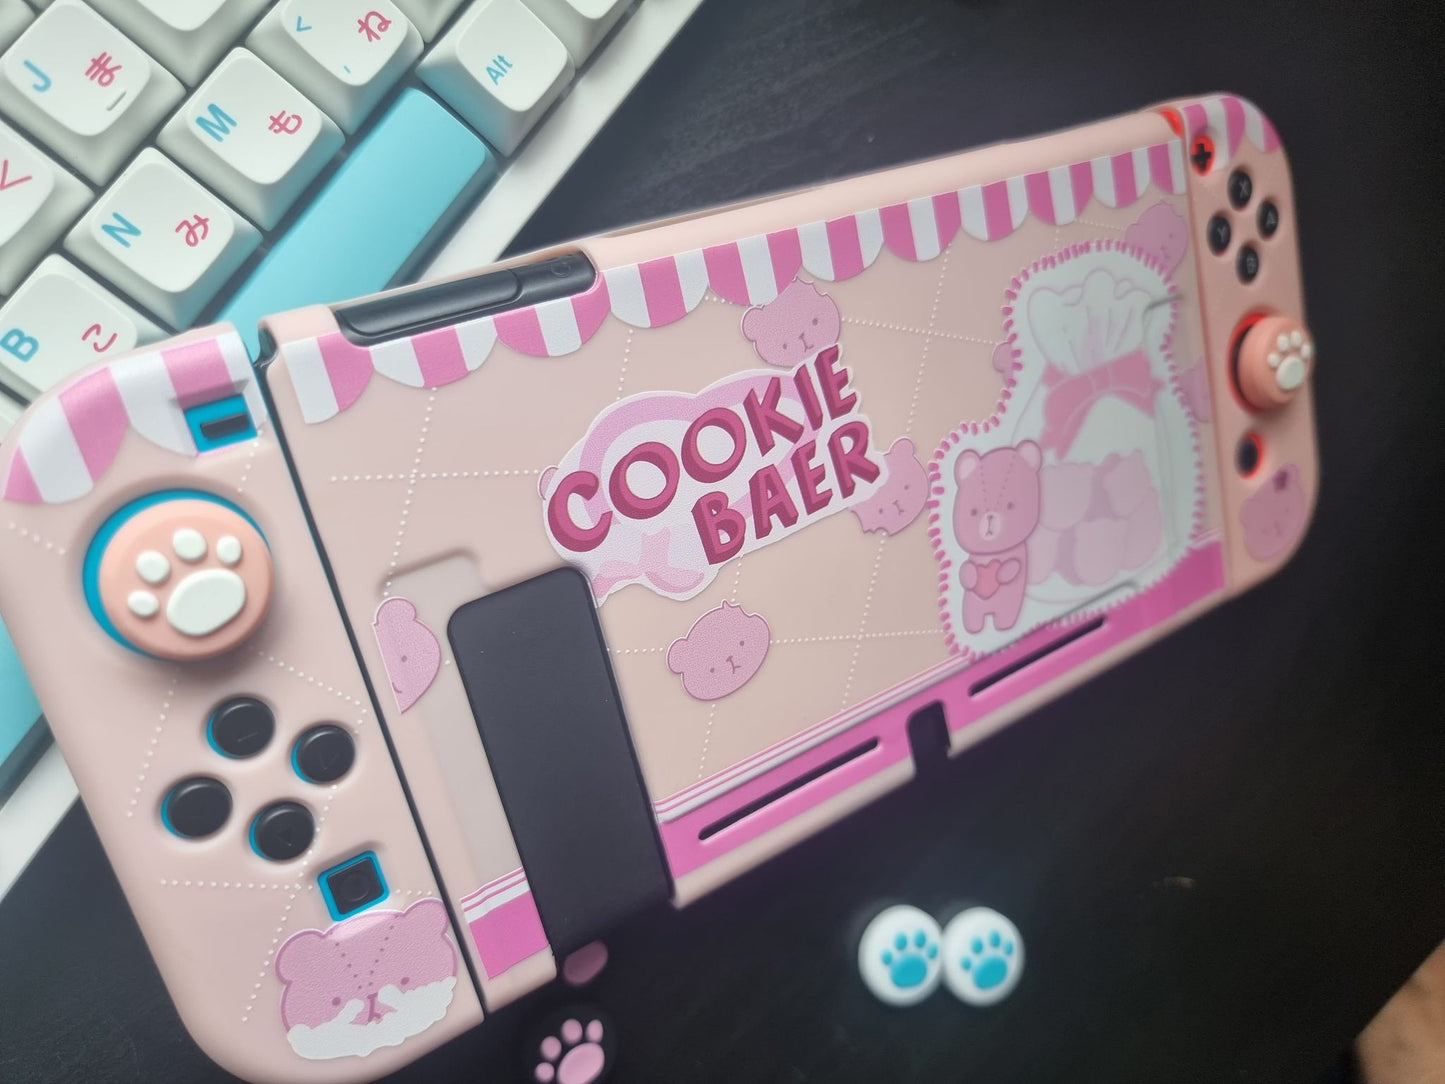 Nintendo Switch COOKIE BAER Protective Case and Joy-Con Cover